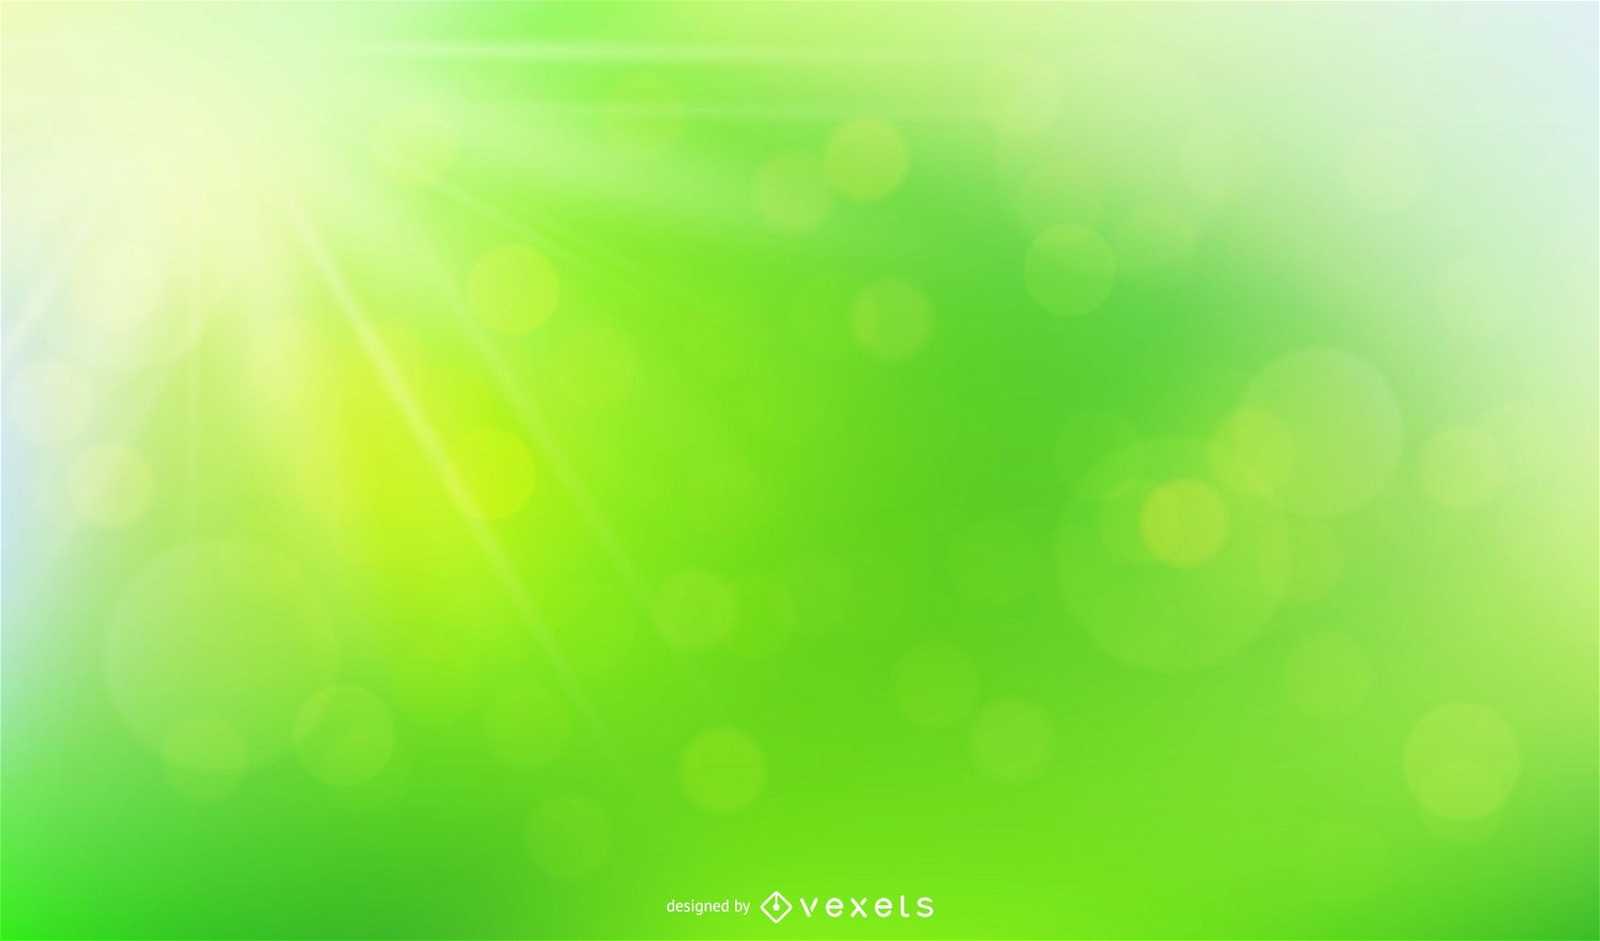 Luxury green background with overlap layer Vector Image